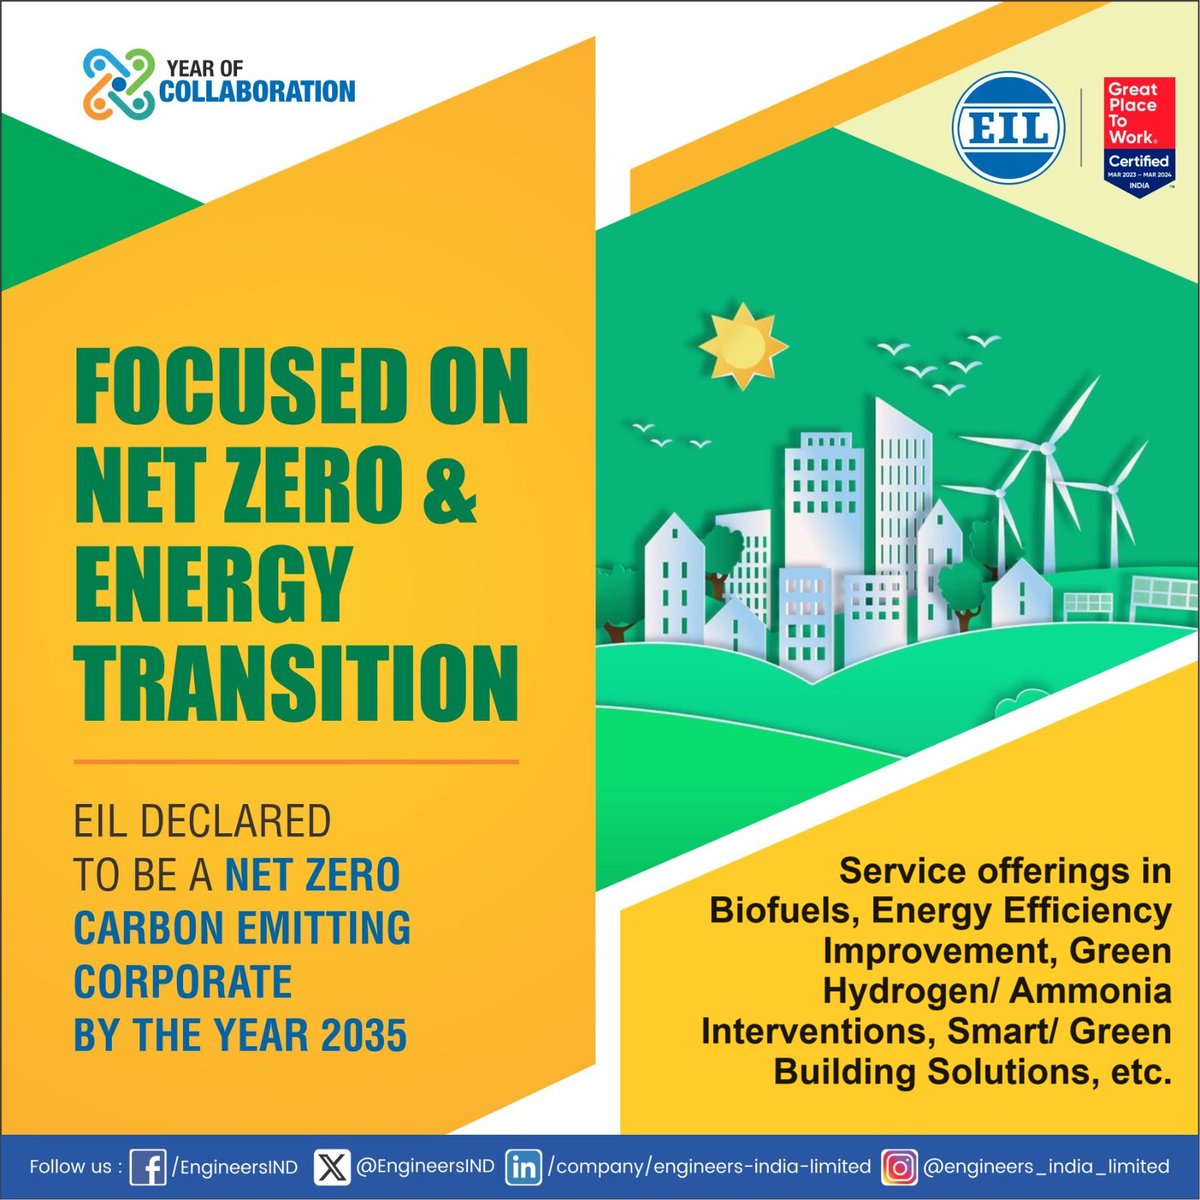 As a responsible corporate citizen, EIL declared to become a net zero carbon emitter by the year 2035. Owing to its vast experience of executing legacy projects in the energy sector, EIL is well placed to address the emerging needs of assessing GHG emissions for industries and